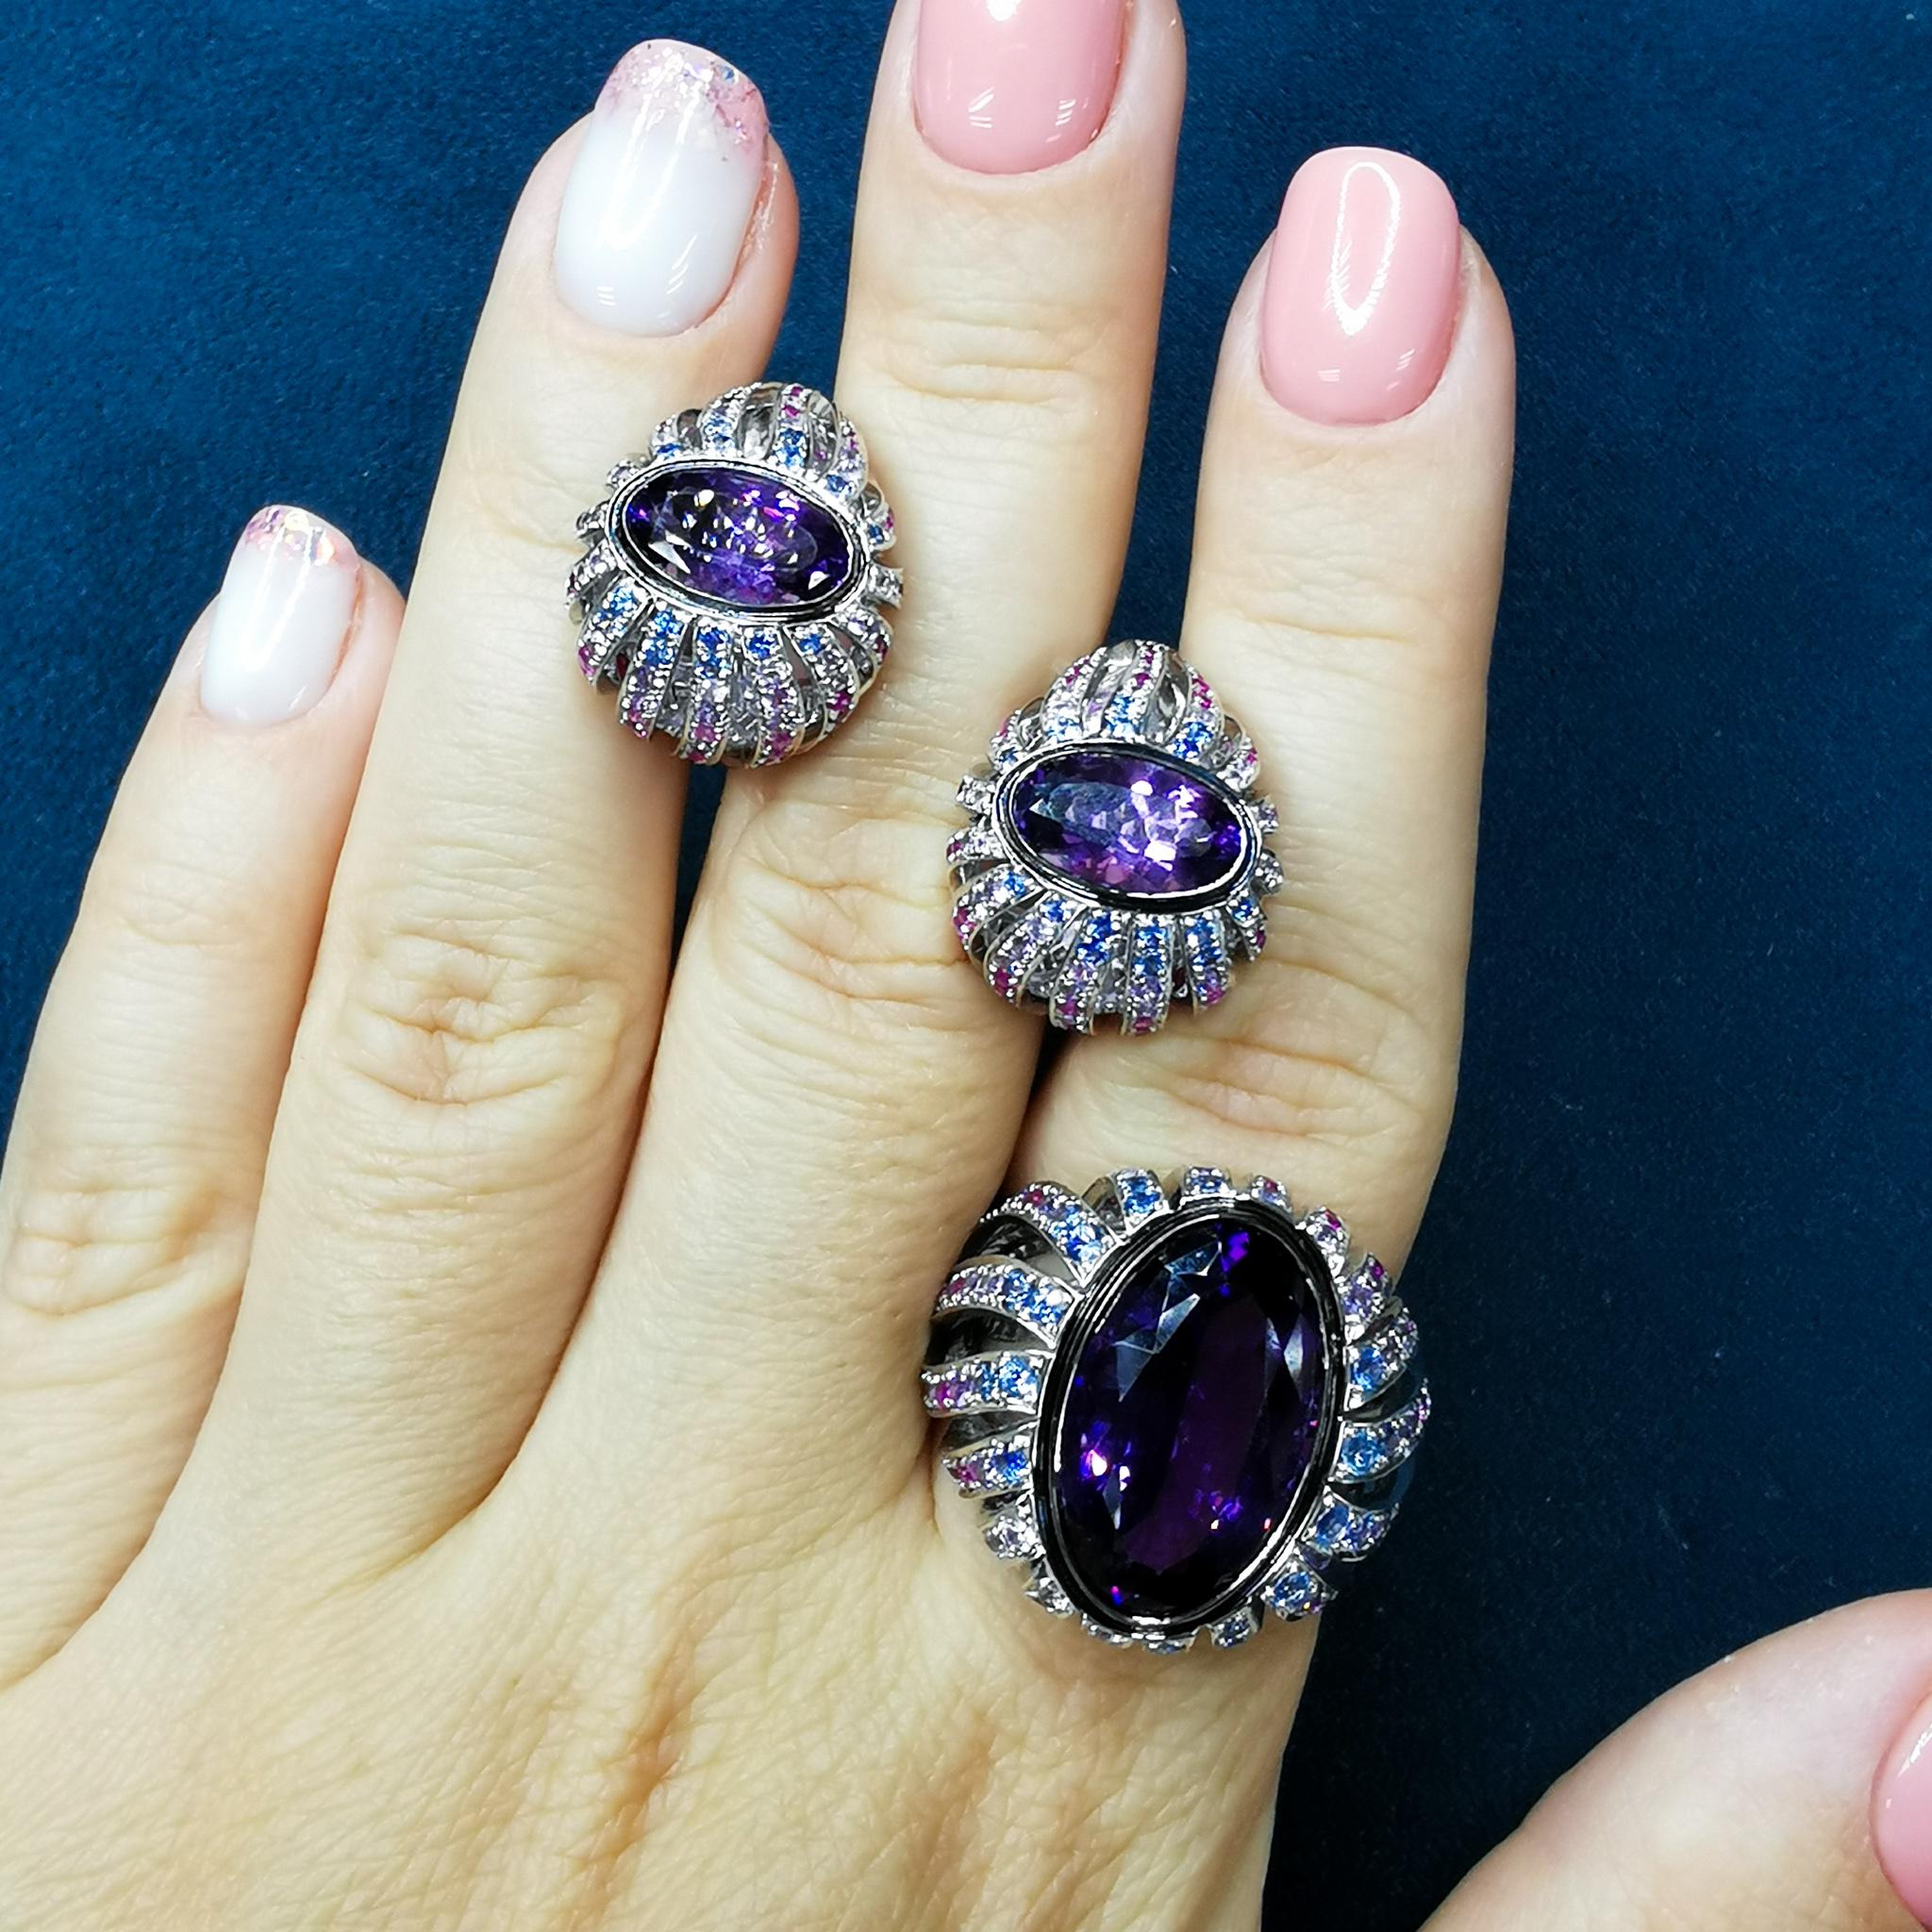 Amethyst Rubies Sapphires 18 Karat White Gold New Age Suite
An incredibly bright Oval-shape Amethysts, from which many 18 Karat White Gold paths slide down, where Pink, Blue, and Purple Sapphires and 100 Rubies are fixed. The splendor of cold shades